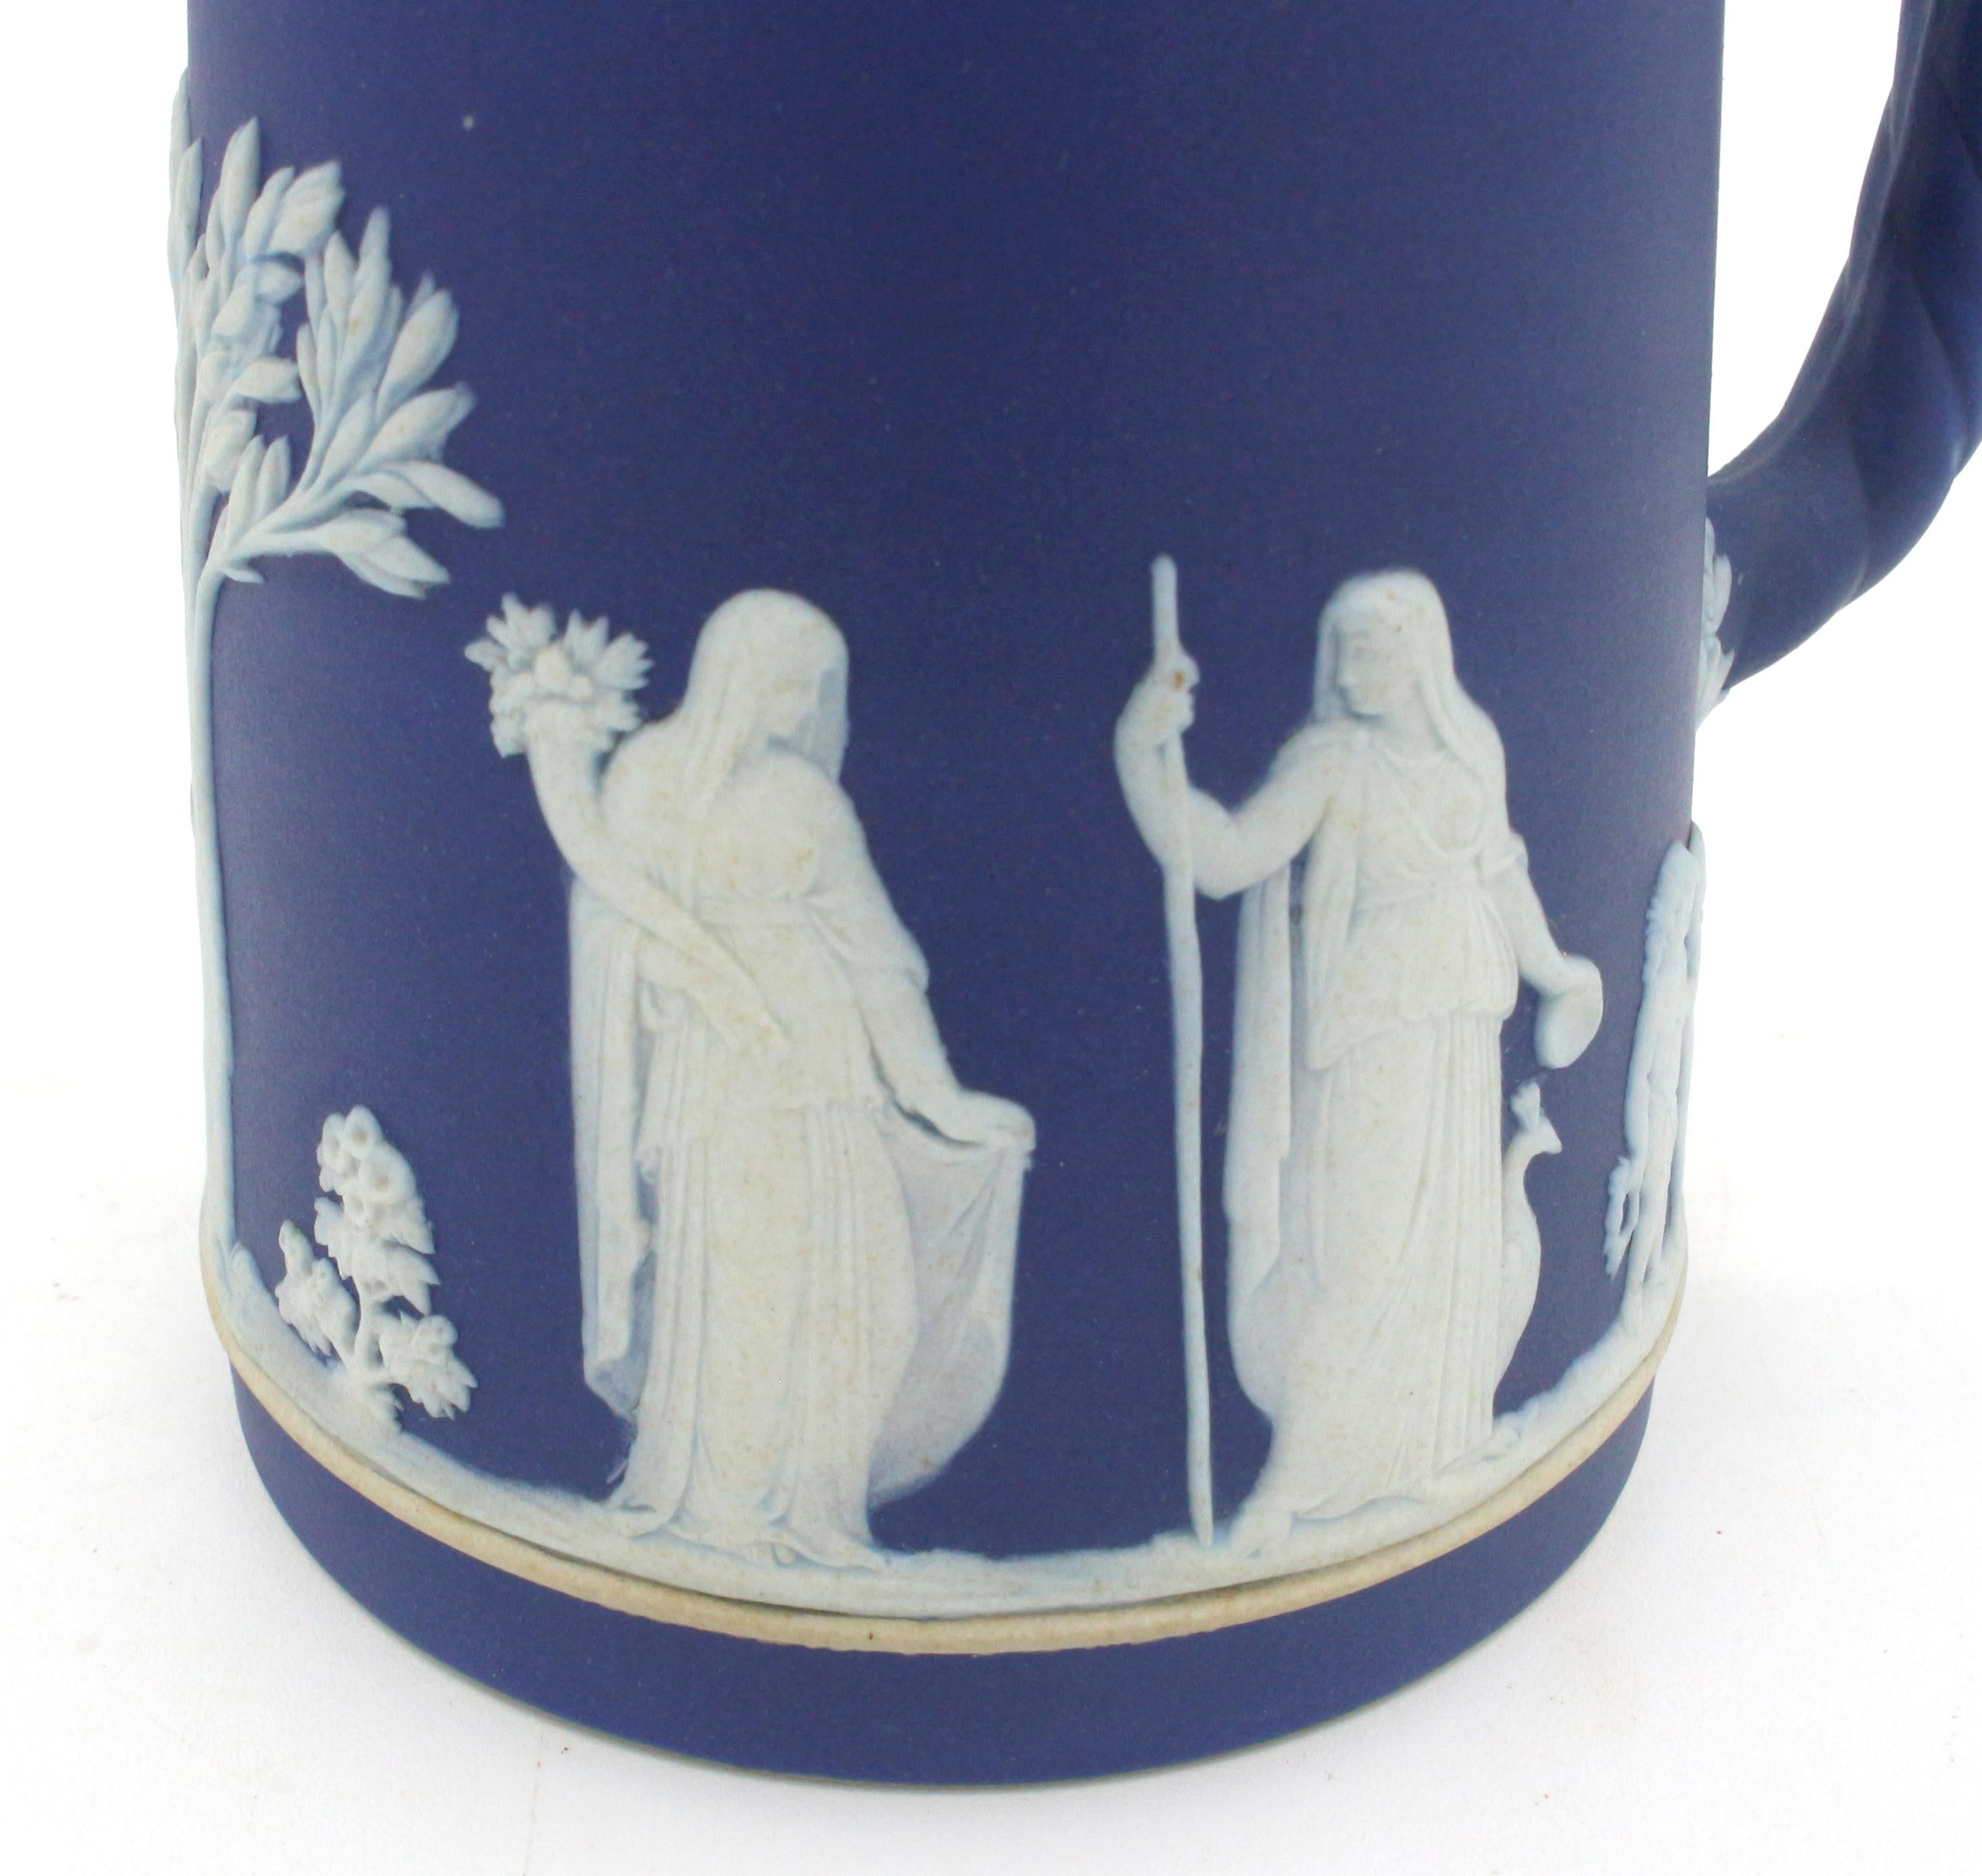  Early 20th-Century Jasperware Wedgwood Pitcher with Sterling Rim In Good Condition For Sale In Chapel Hill, NC